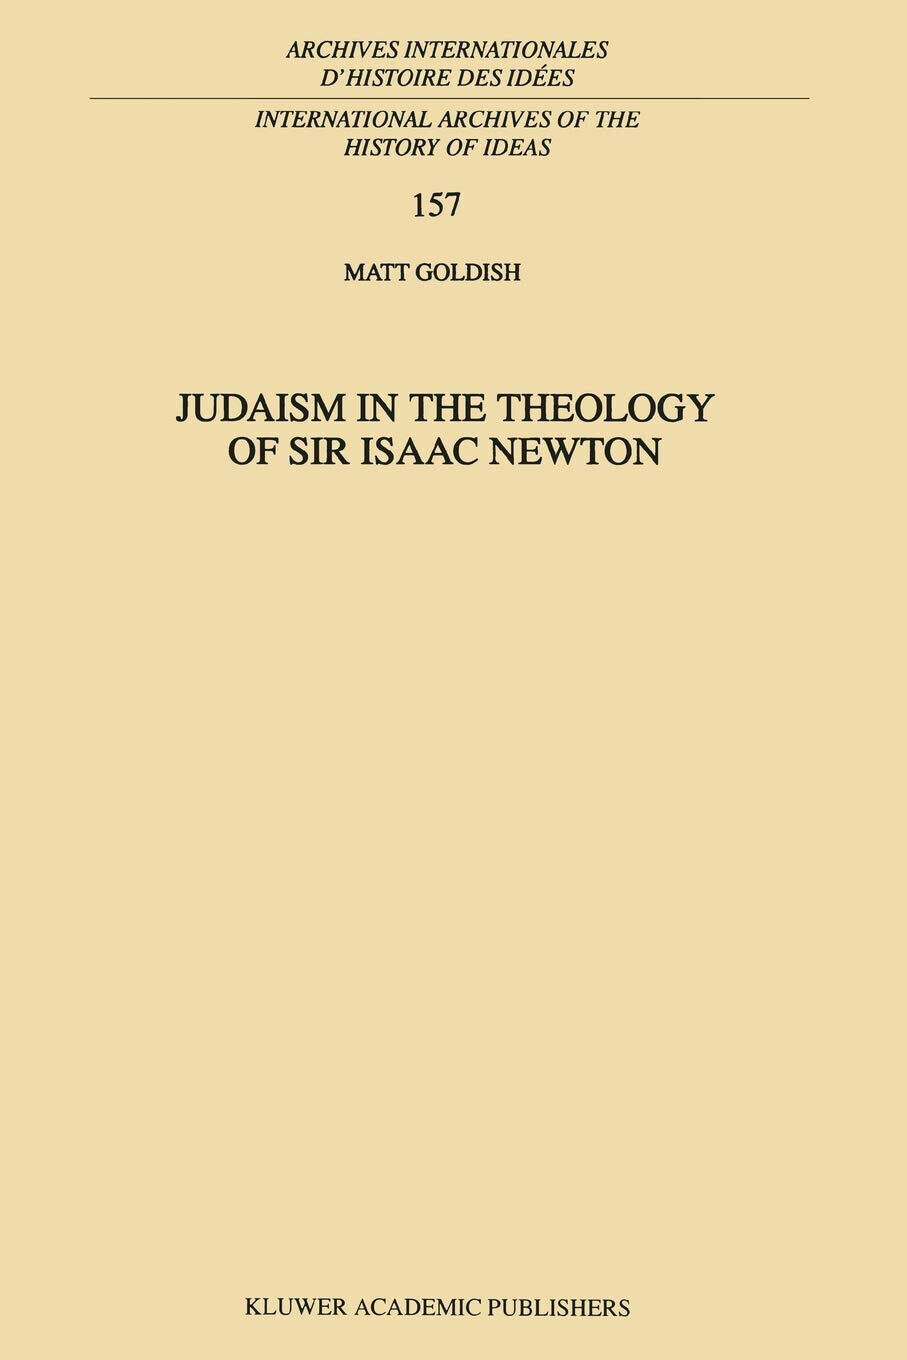 Judaism in the Theology of Sir Isaac Newton - M. Goldish - Springer, 2010